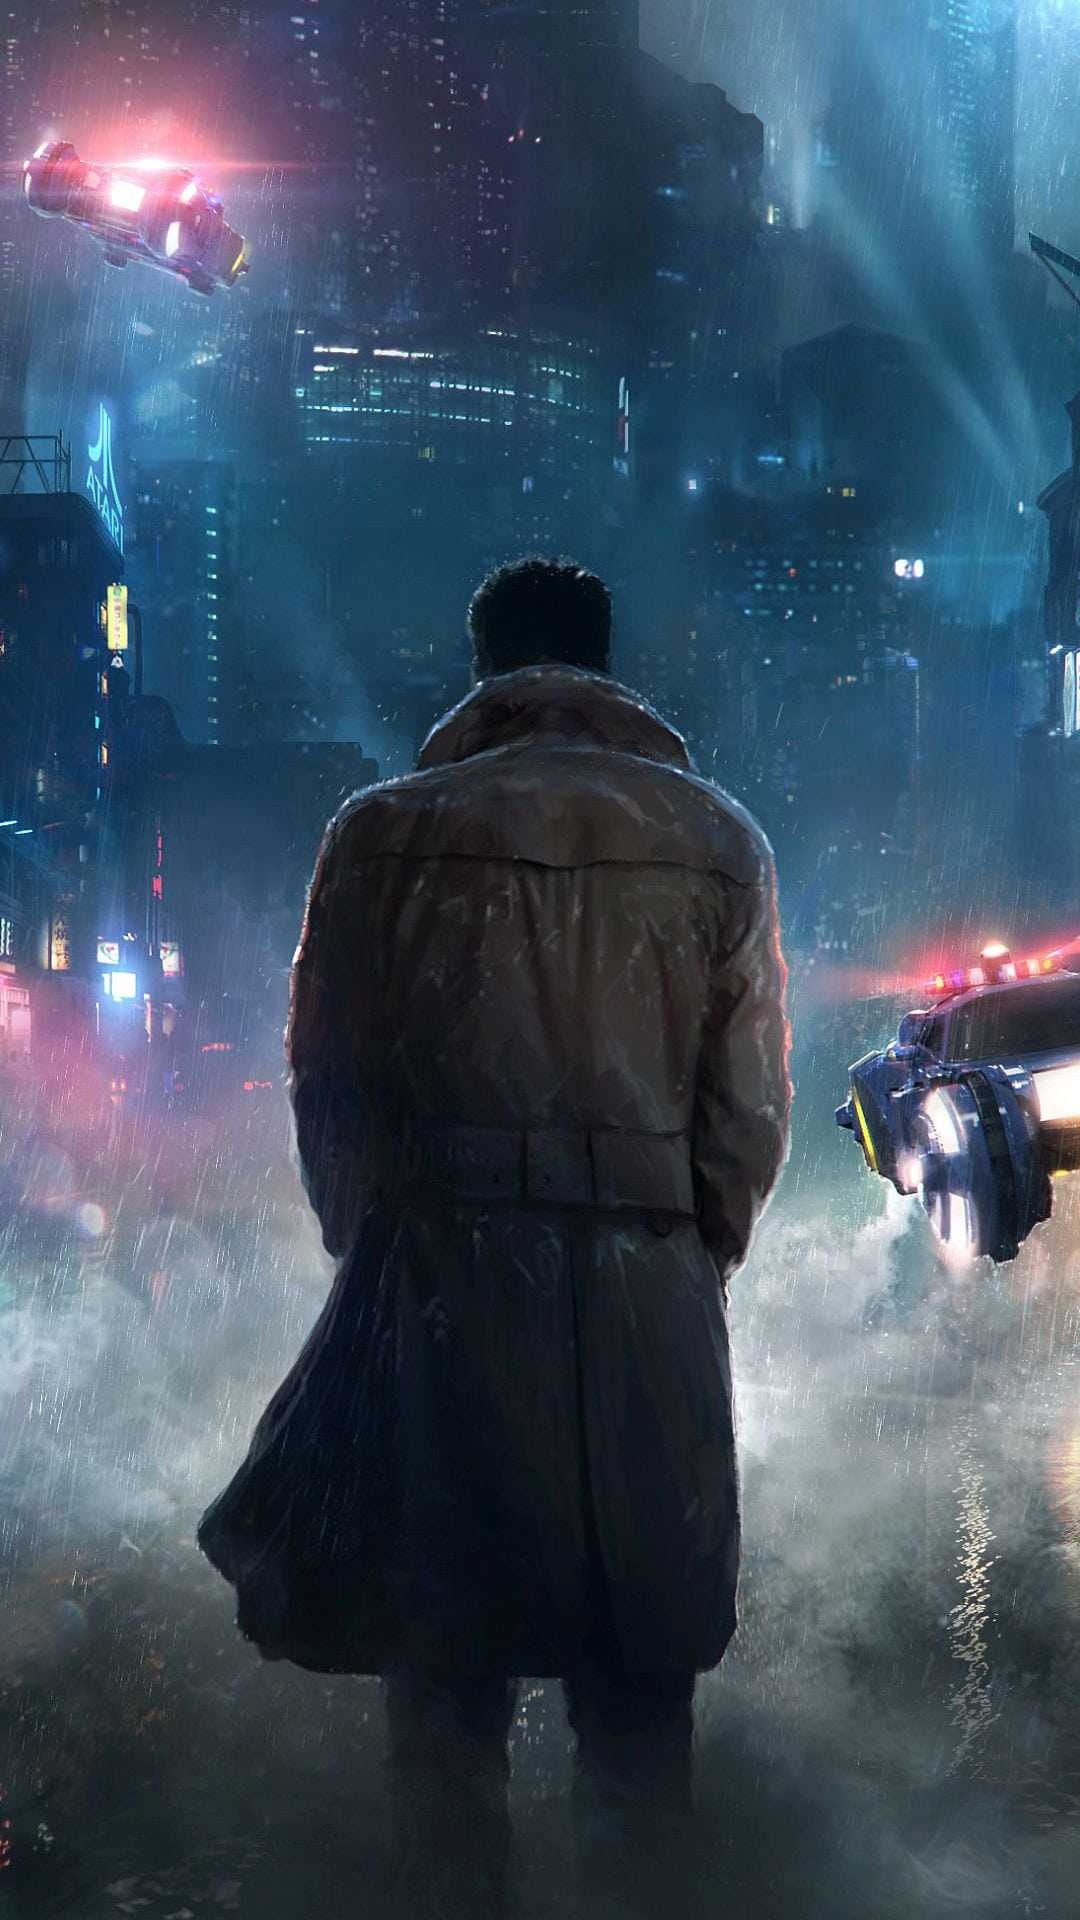 Blade Runner franchise, Iconic imagery, Neo-noir atmosphere, Cult classic, 1080x1920 Full HD Handy